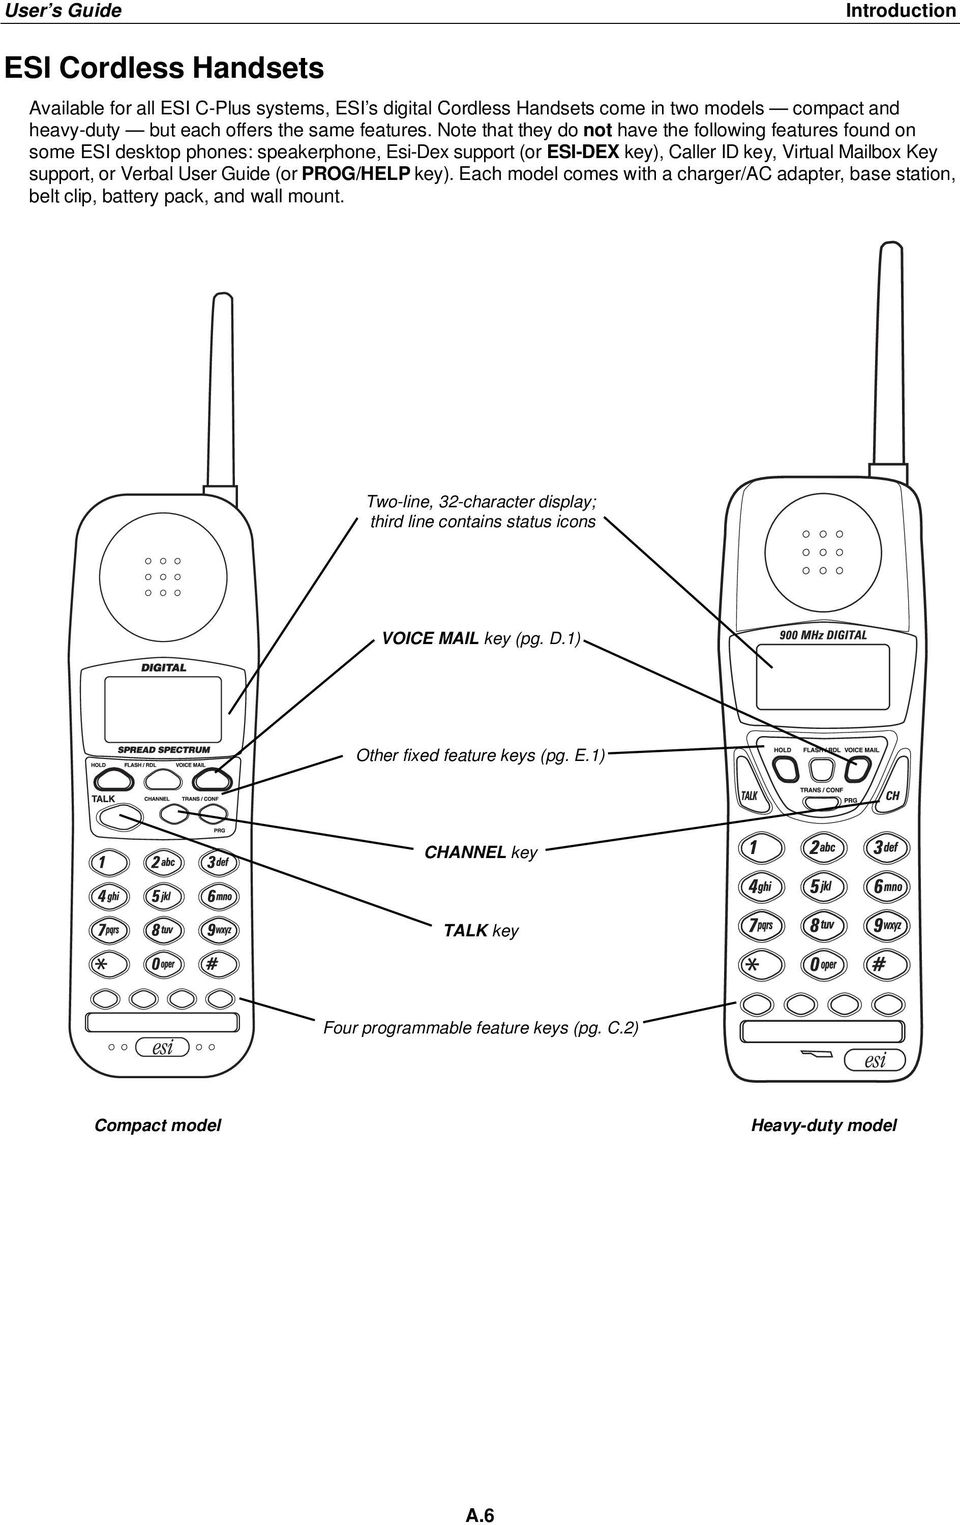 Note that they do not have the following features found on some ESI desktop phones: speakerphone, Esi-Dex support (or ESI-DEX key), Caller ID key, Virtual Mailbox Key support, or